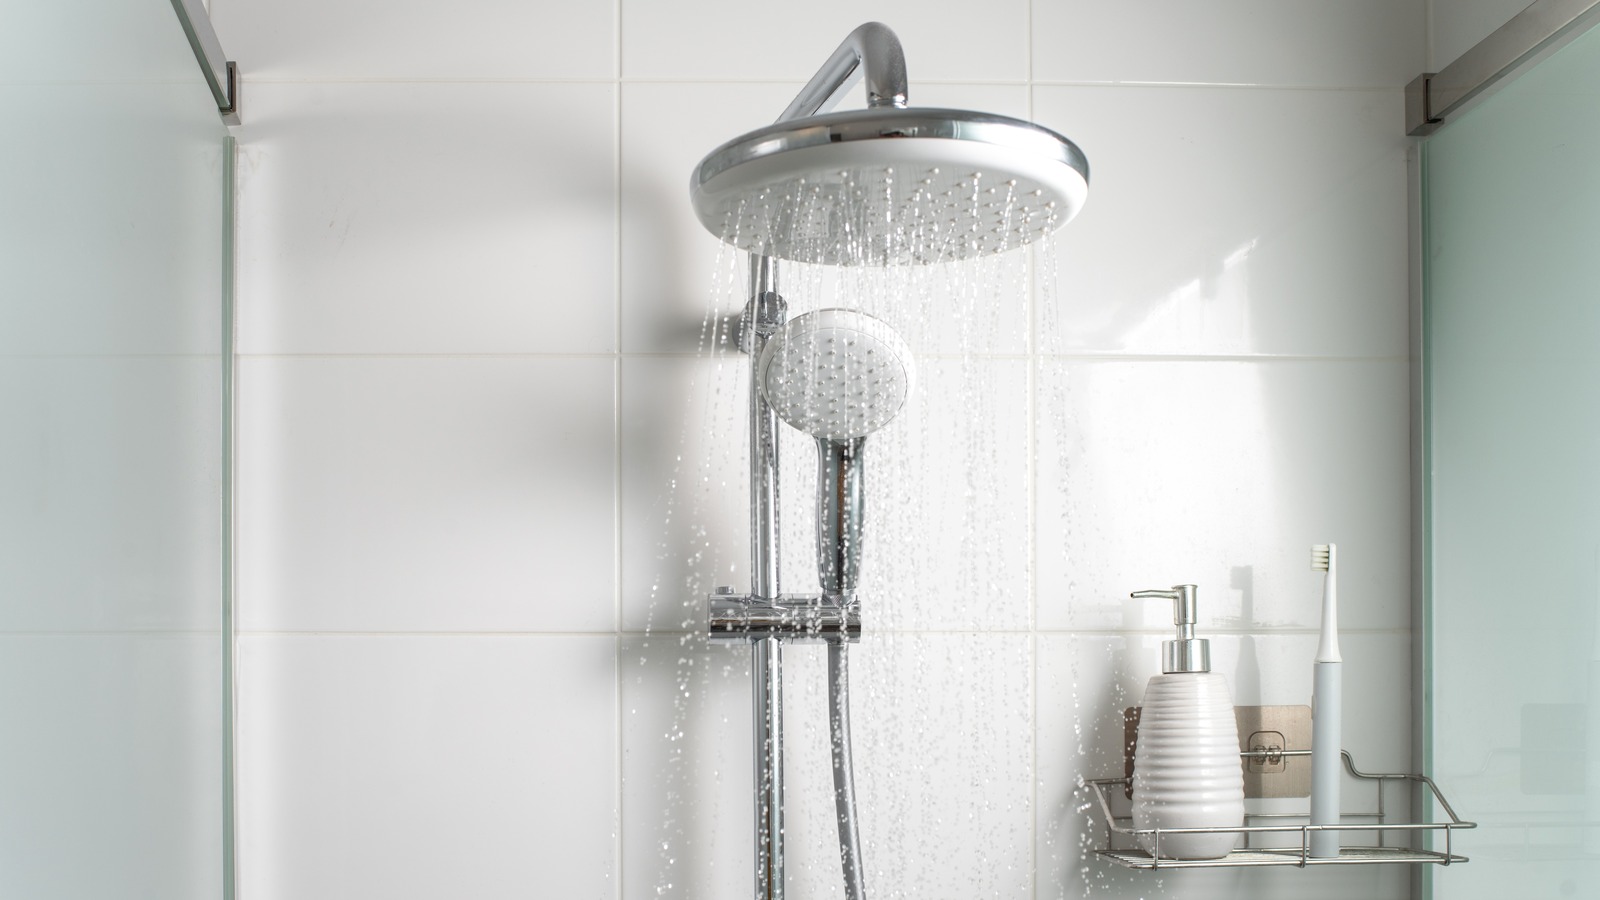 https://www.housedigest.com/img/gallery/how-to-properly-clean-your-showerhead/l-intro-1671120365.jpg